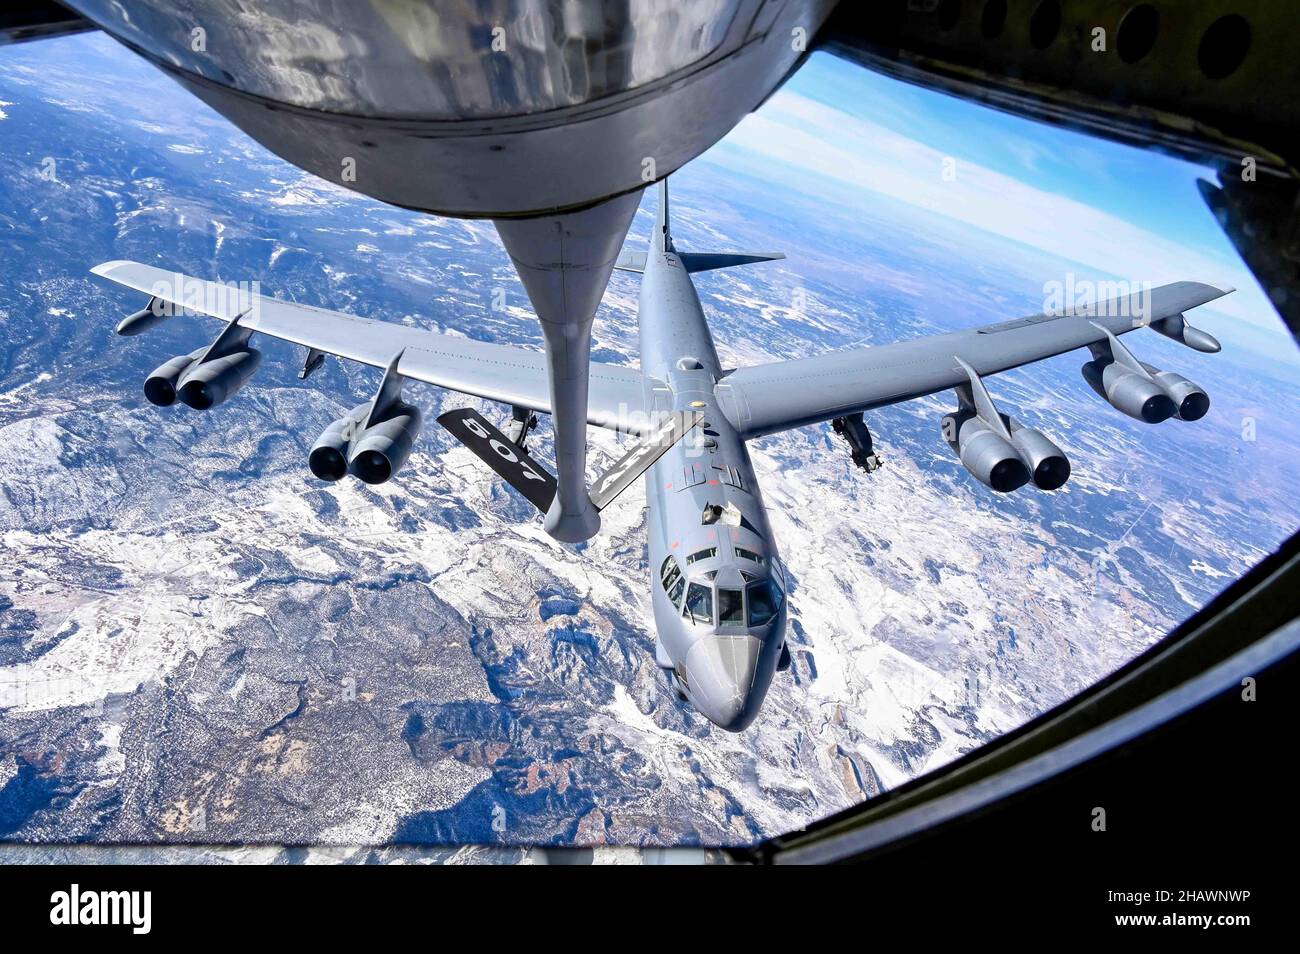 Rocky Mountains, United States. 13 December, 2021. A U.S. Air Force B-52 Stratofortress strategic bomber assigned to the 96th Bomb Squadron prepares to refuel from a KC-135 Stratotanker over the Rocky Mountains December 13, 2021 Colorado, USA.  Credit: 2Lt. Mary Begy/US Air Force/Alamy Live News Stock Photo